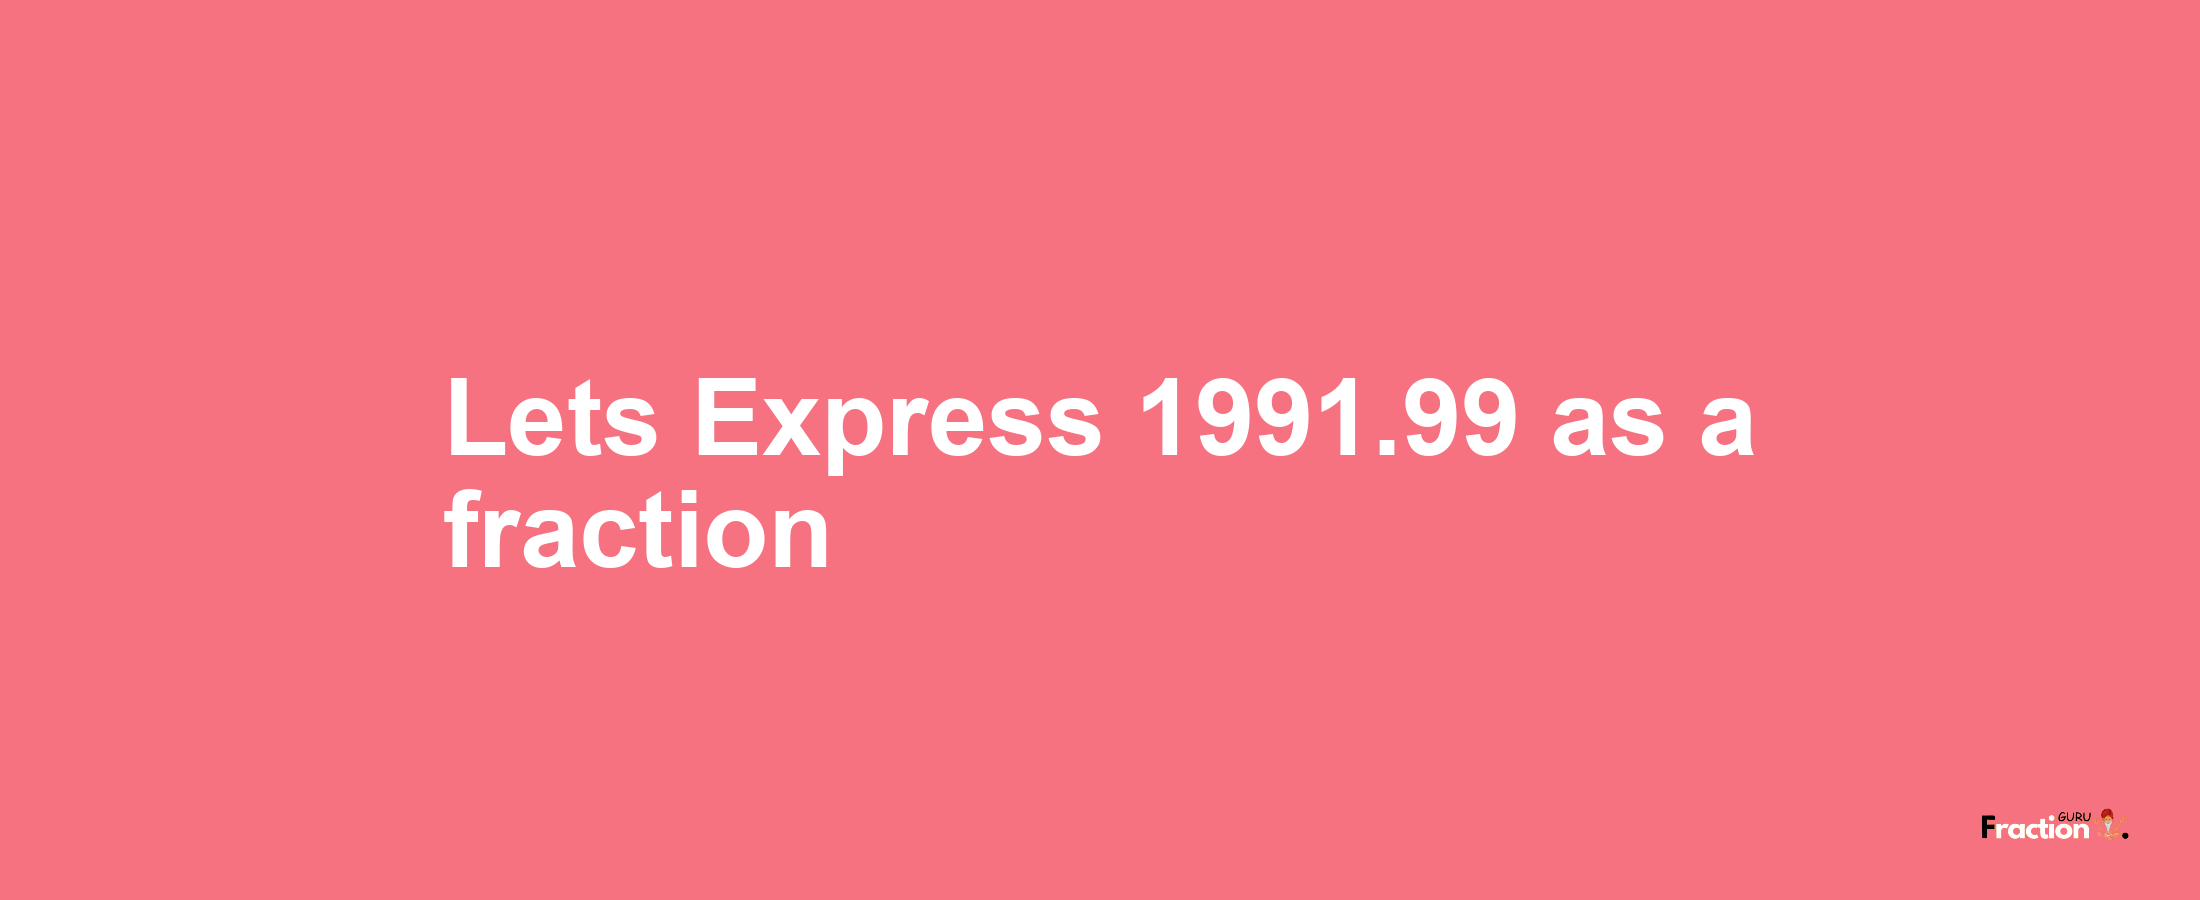 Lets Express 1991.99 as afraction